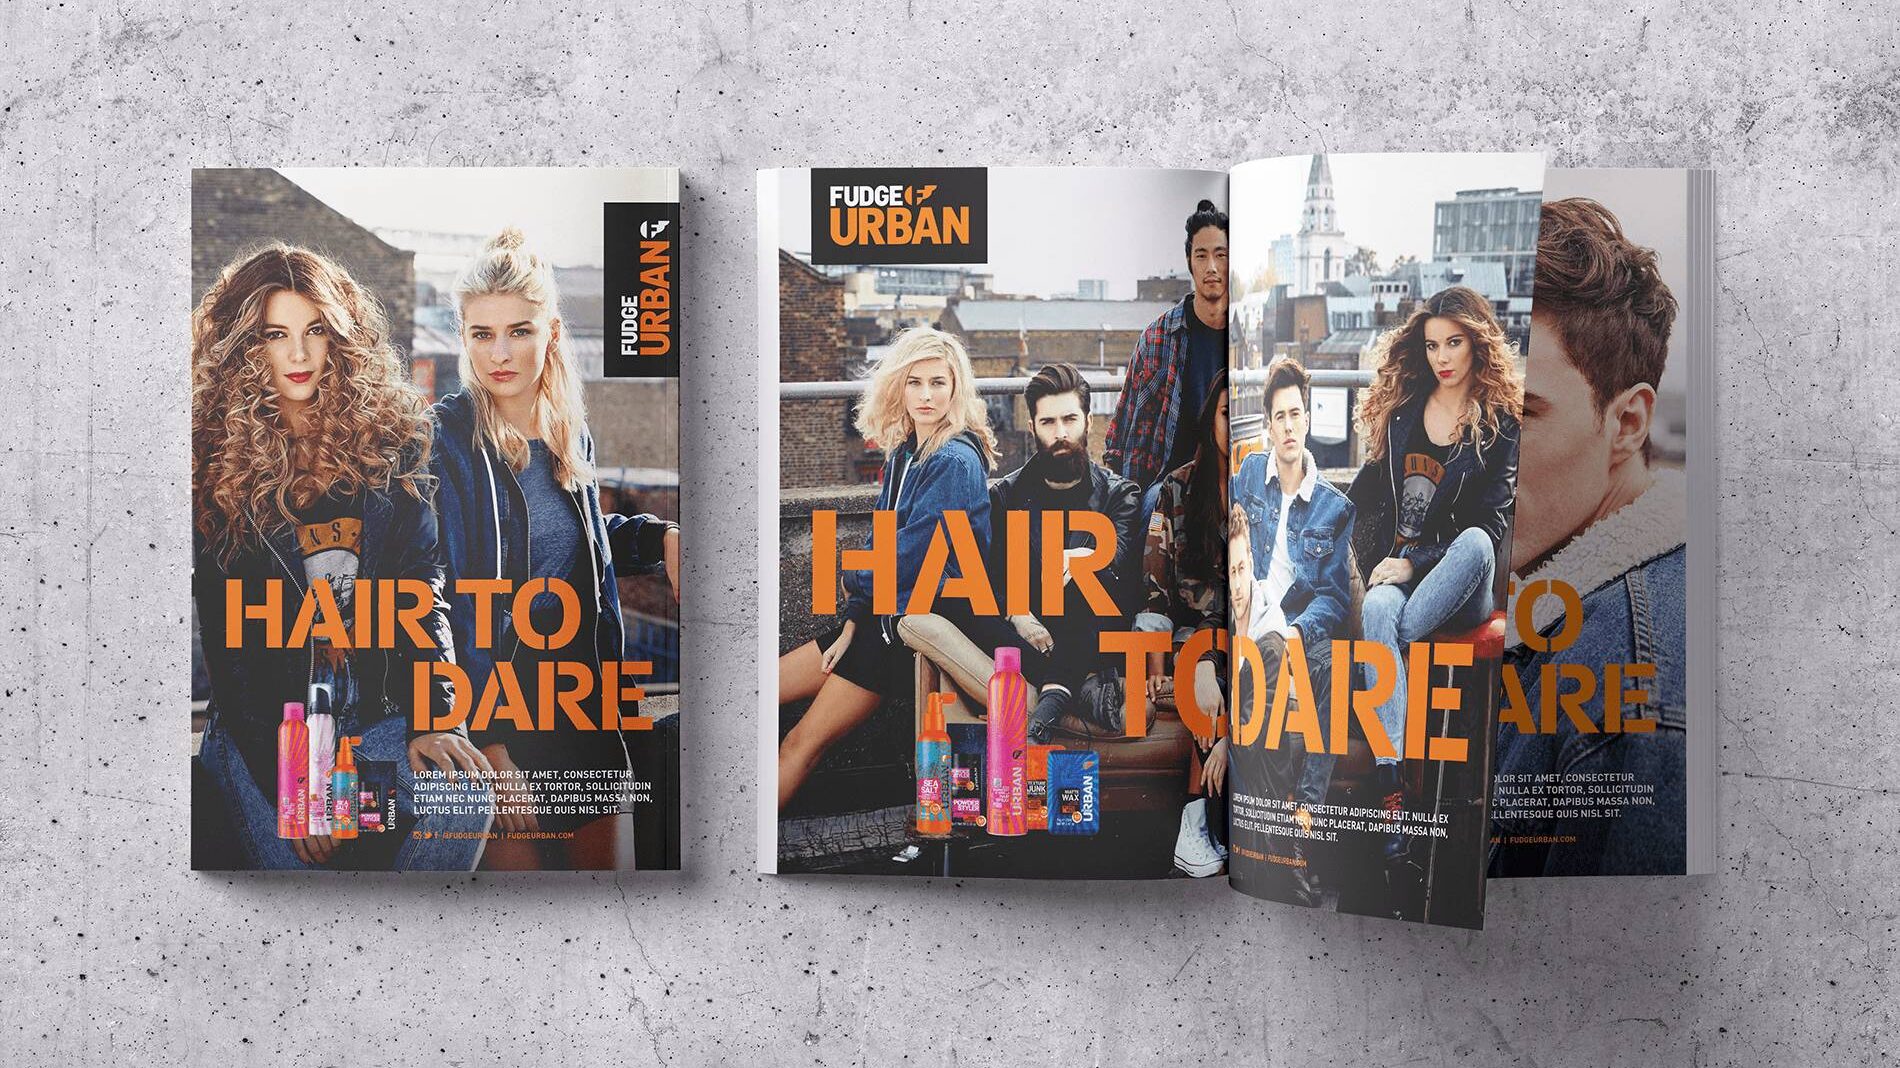 Magazine open spread with double page advert for Fudge Urban range